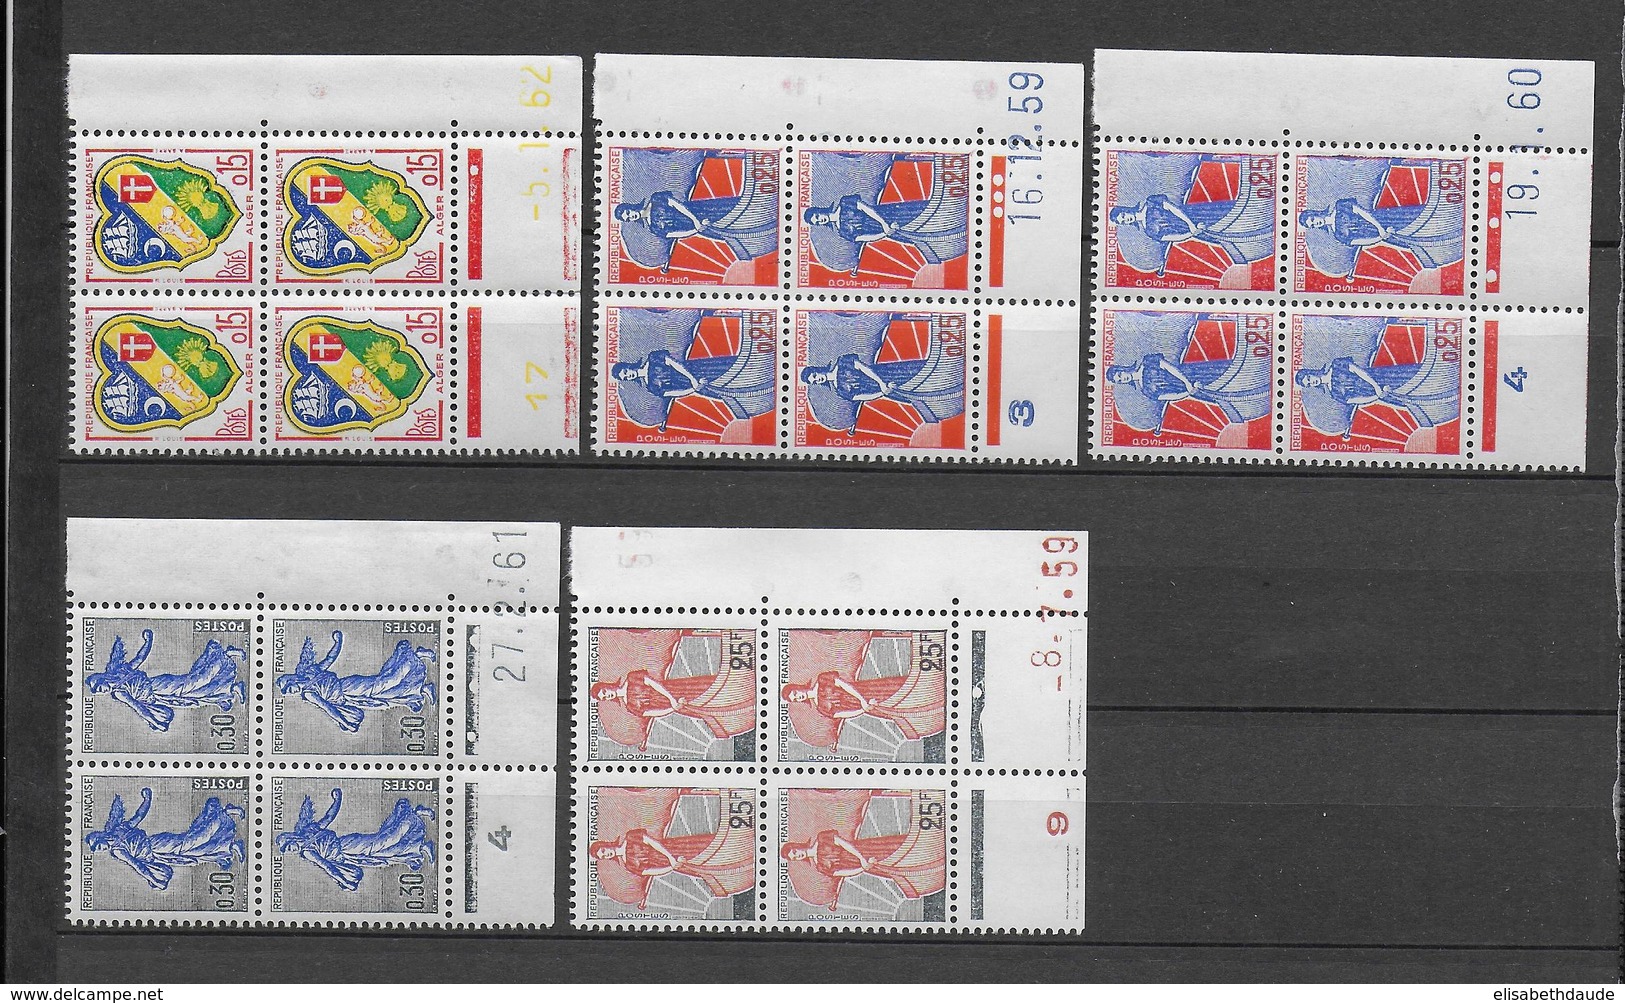 ARMOIRIES + ... - 1959/1962 - YVERT N°1216+1230/1234A - 17 BLOCS COIN DATE DIFFERENTS ** MNH - COTE = 185 EUR. - 1950-1959